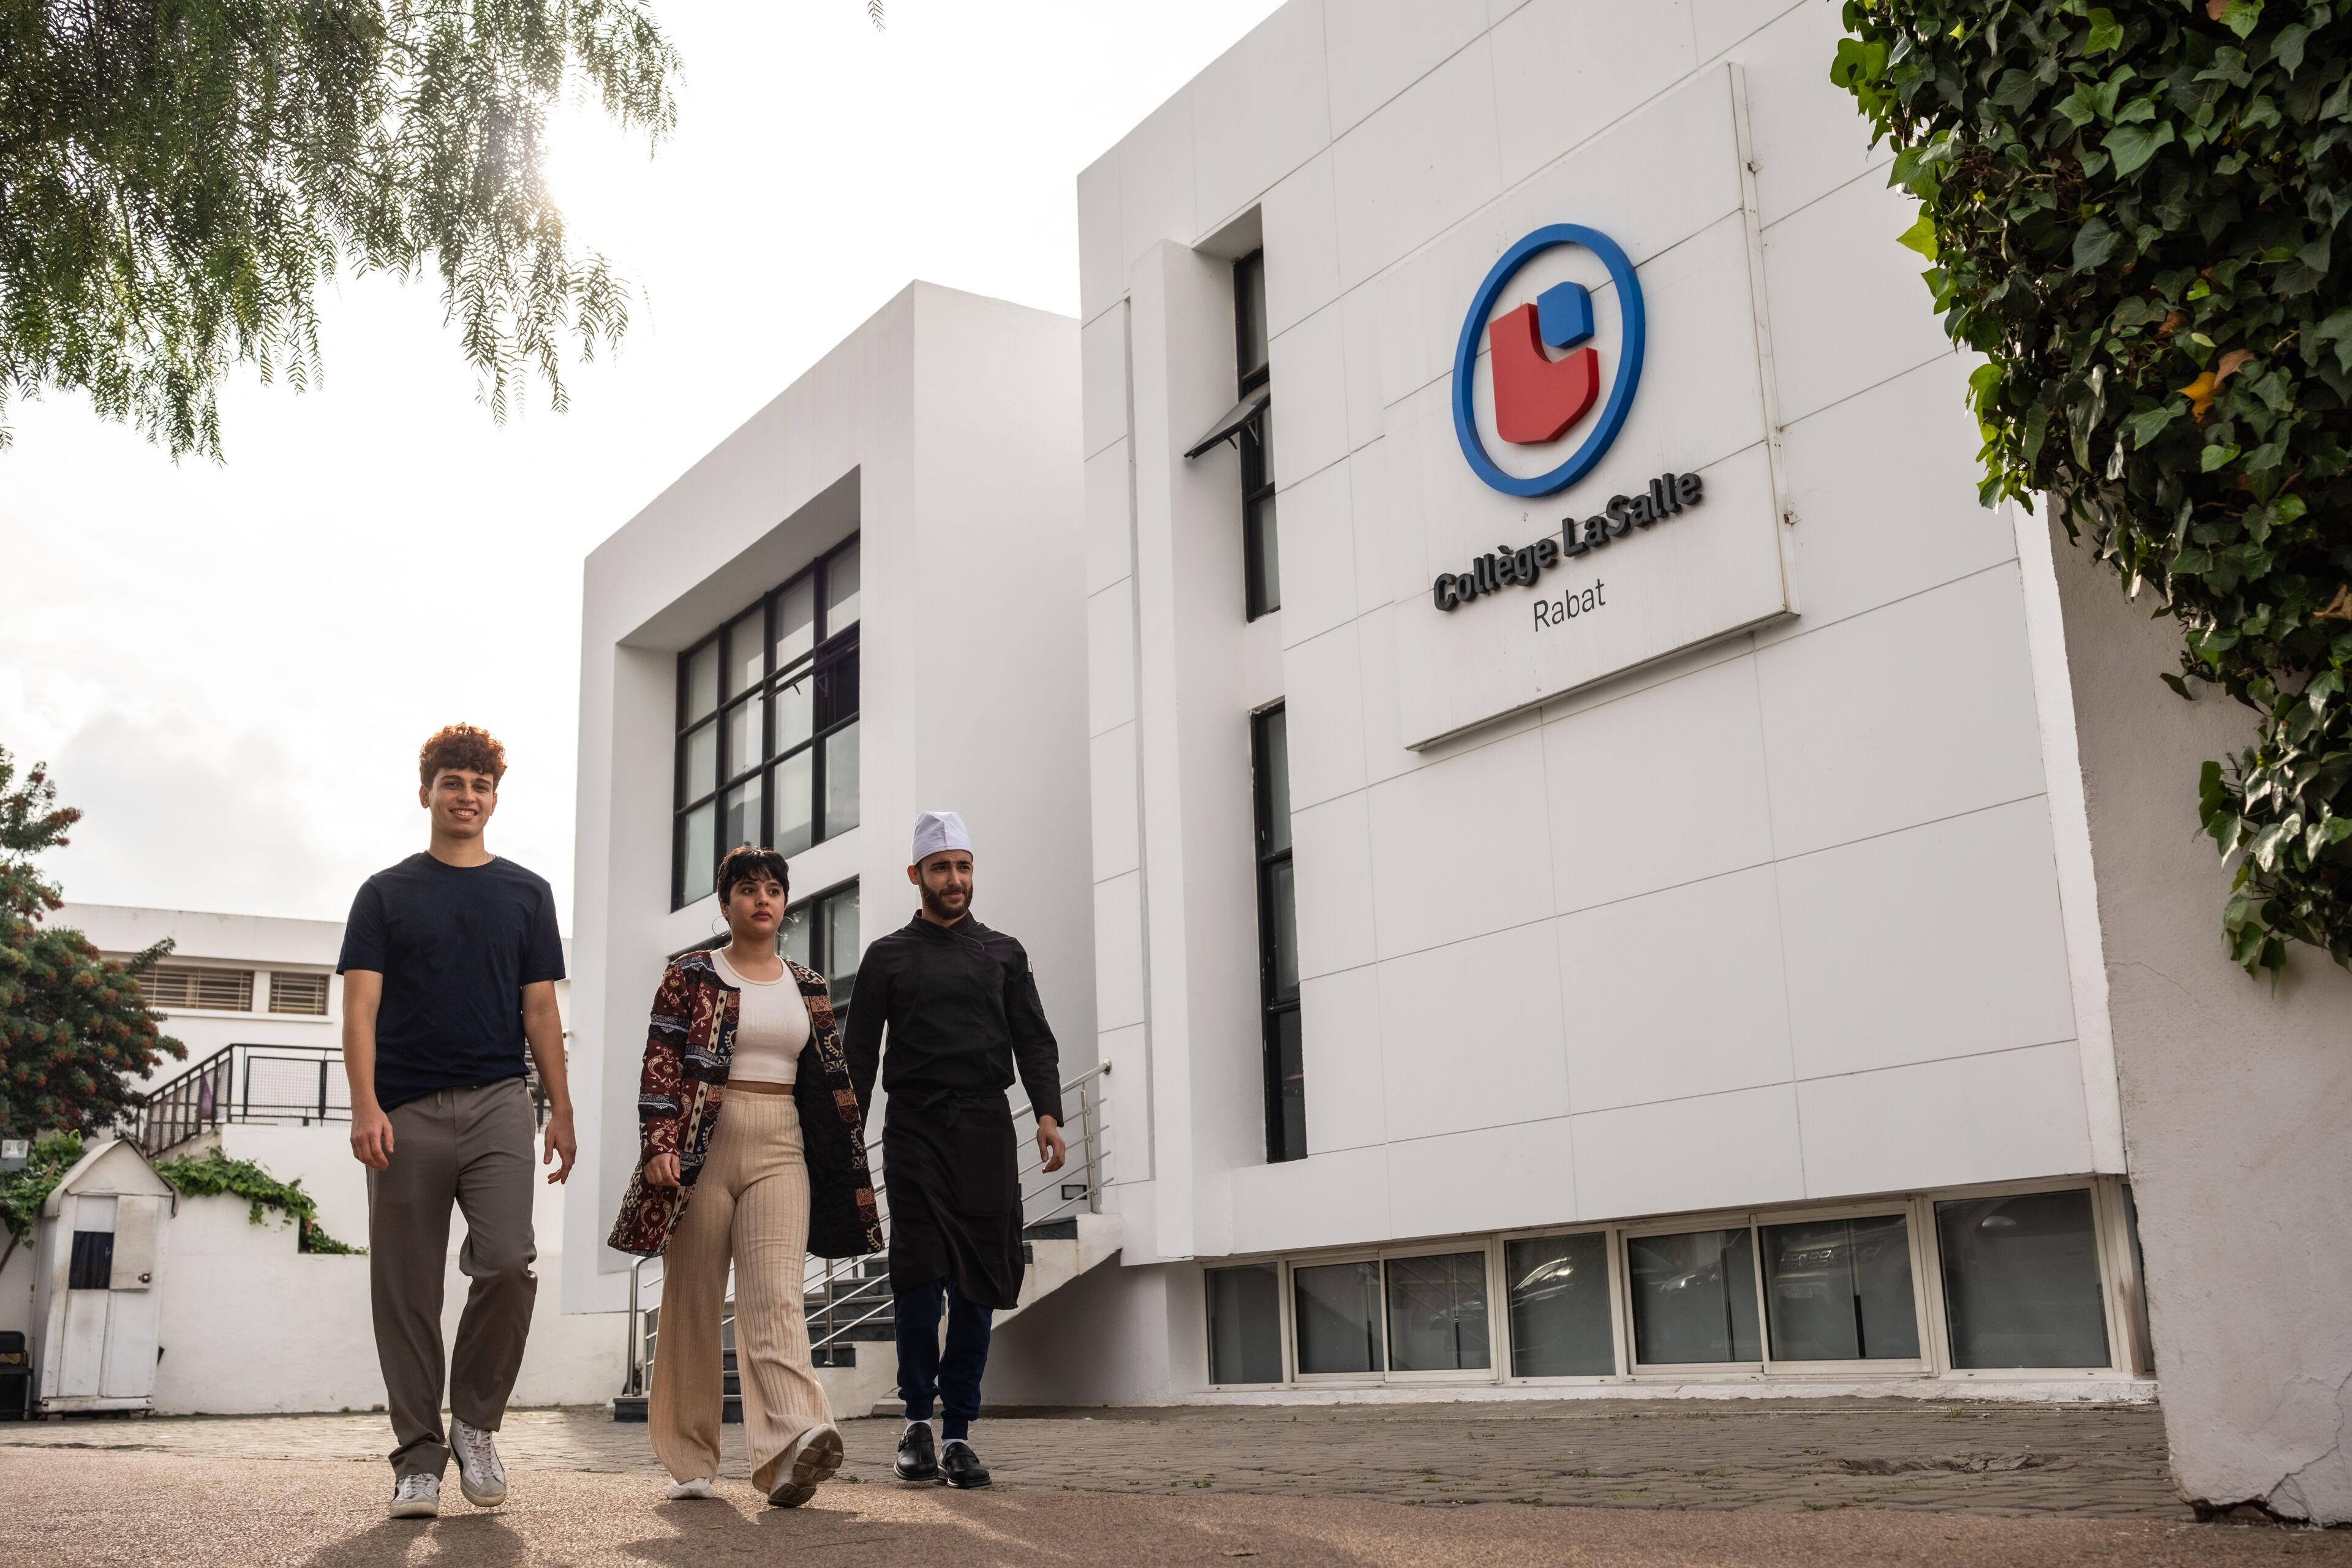 Students walking outside the academic building of Collège LaSalle in Rabat, showcasing campus life.